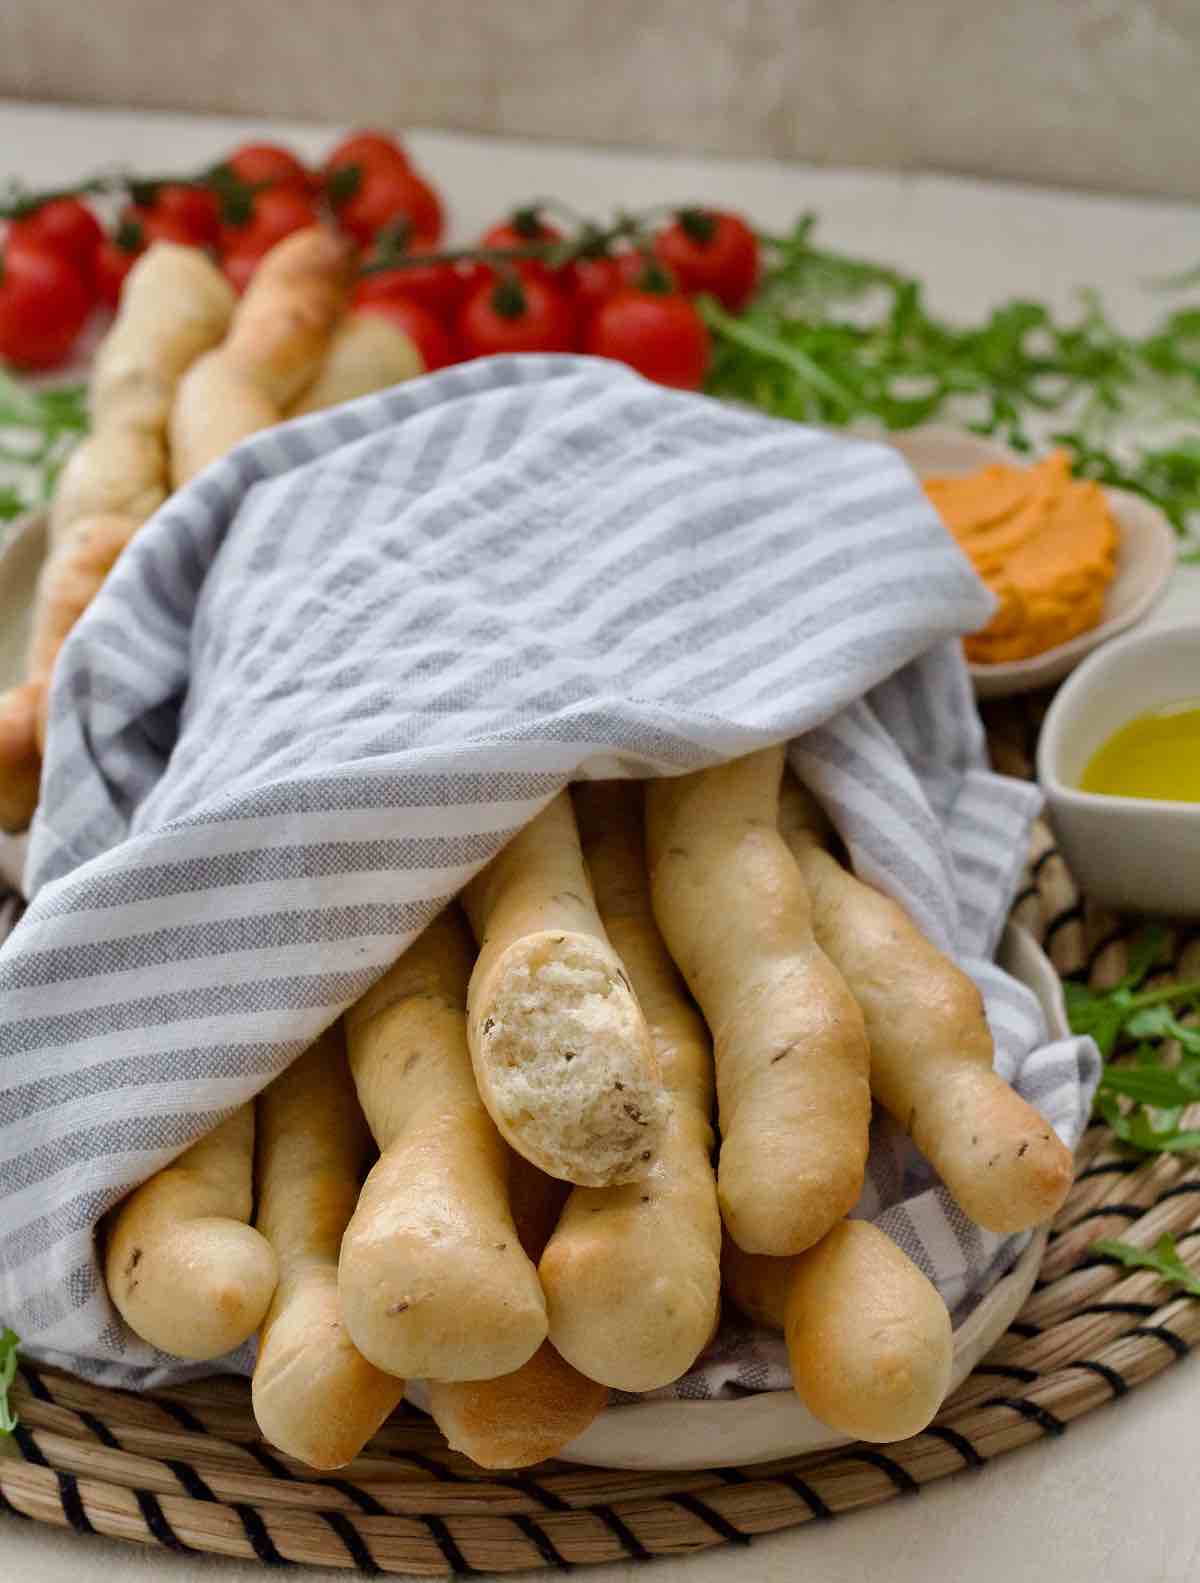 Bunch of breadsticks wrapped in a tea towel.